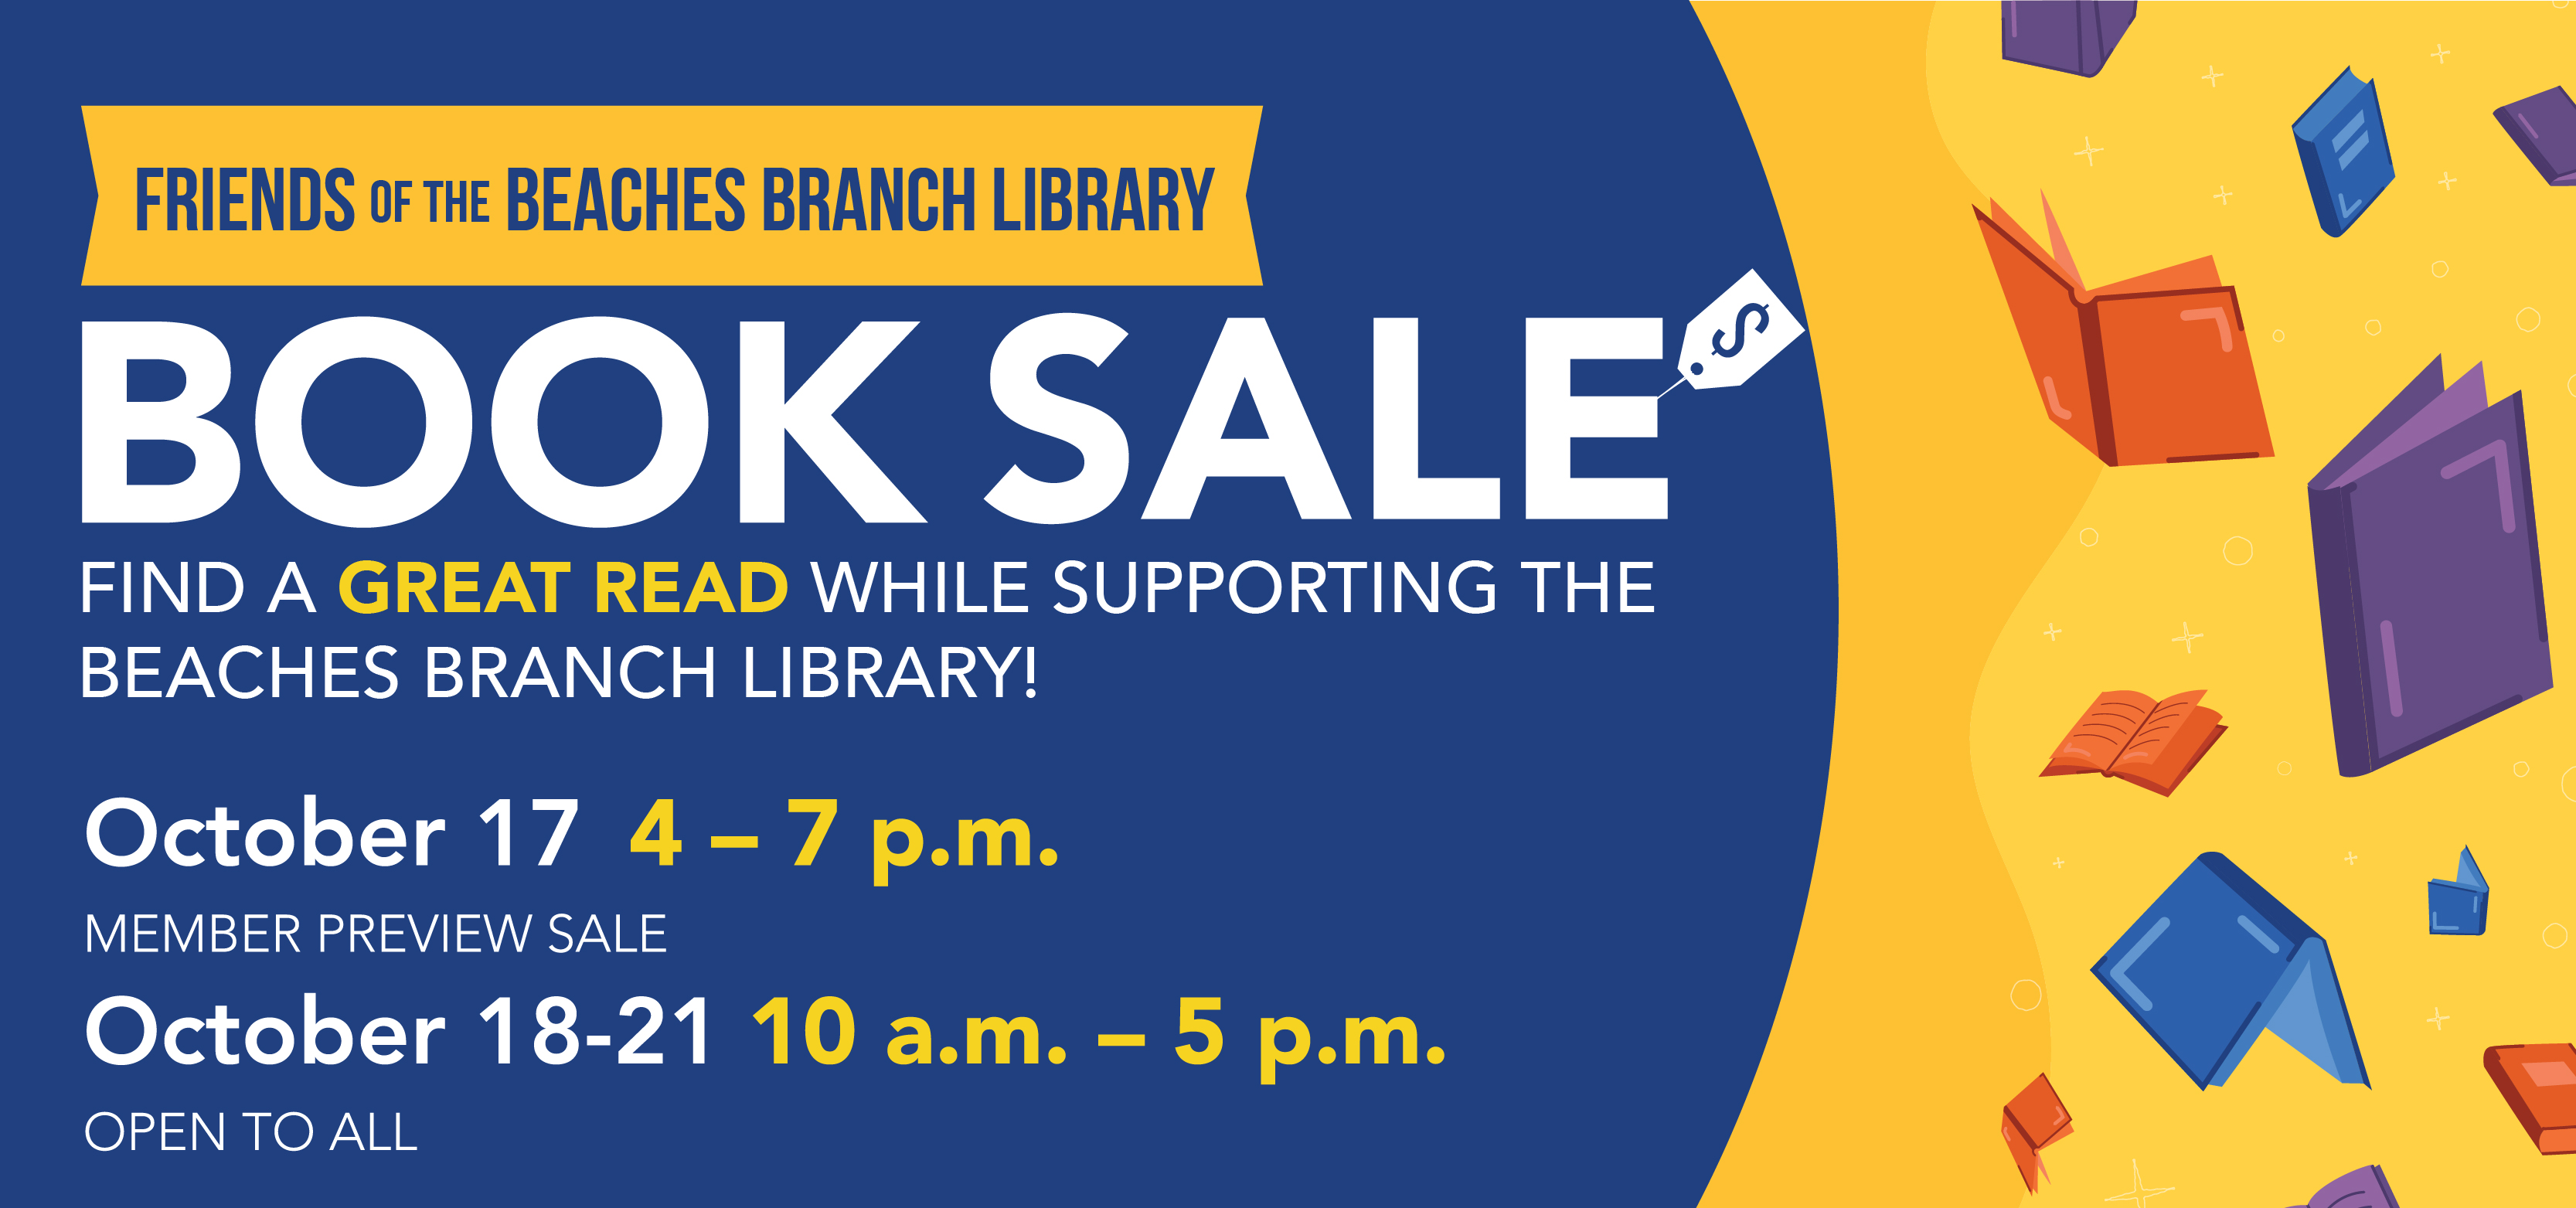 Shop the Friends of the Beaches Branch Library Book Sale on October 17 from 4 pm to 7 pm for members and on October 18 to Octobe